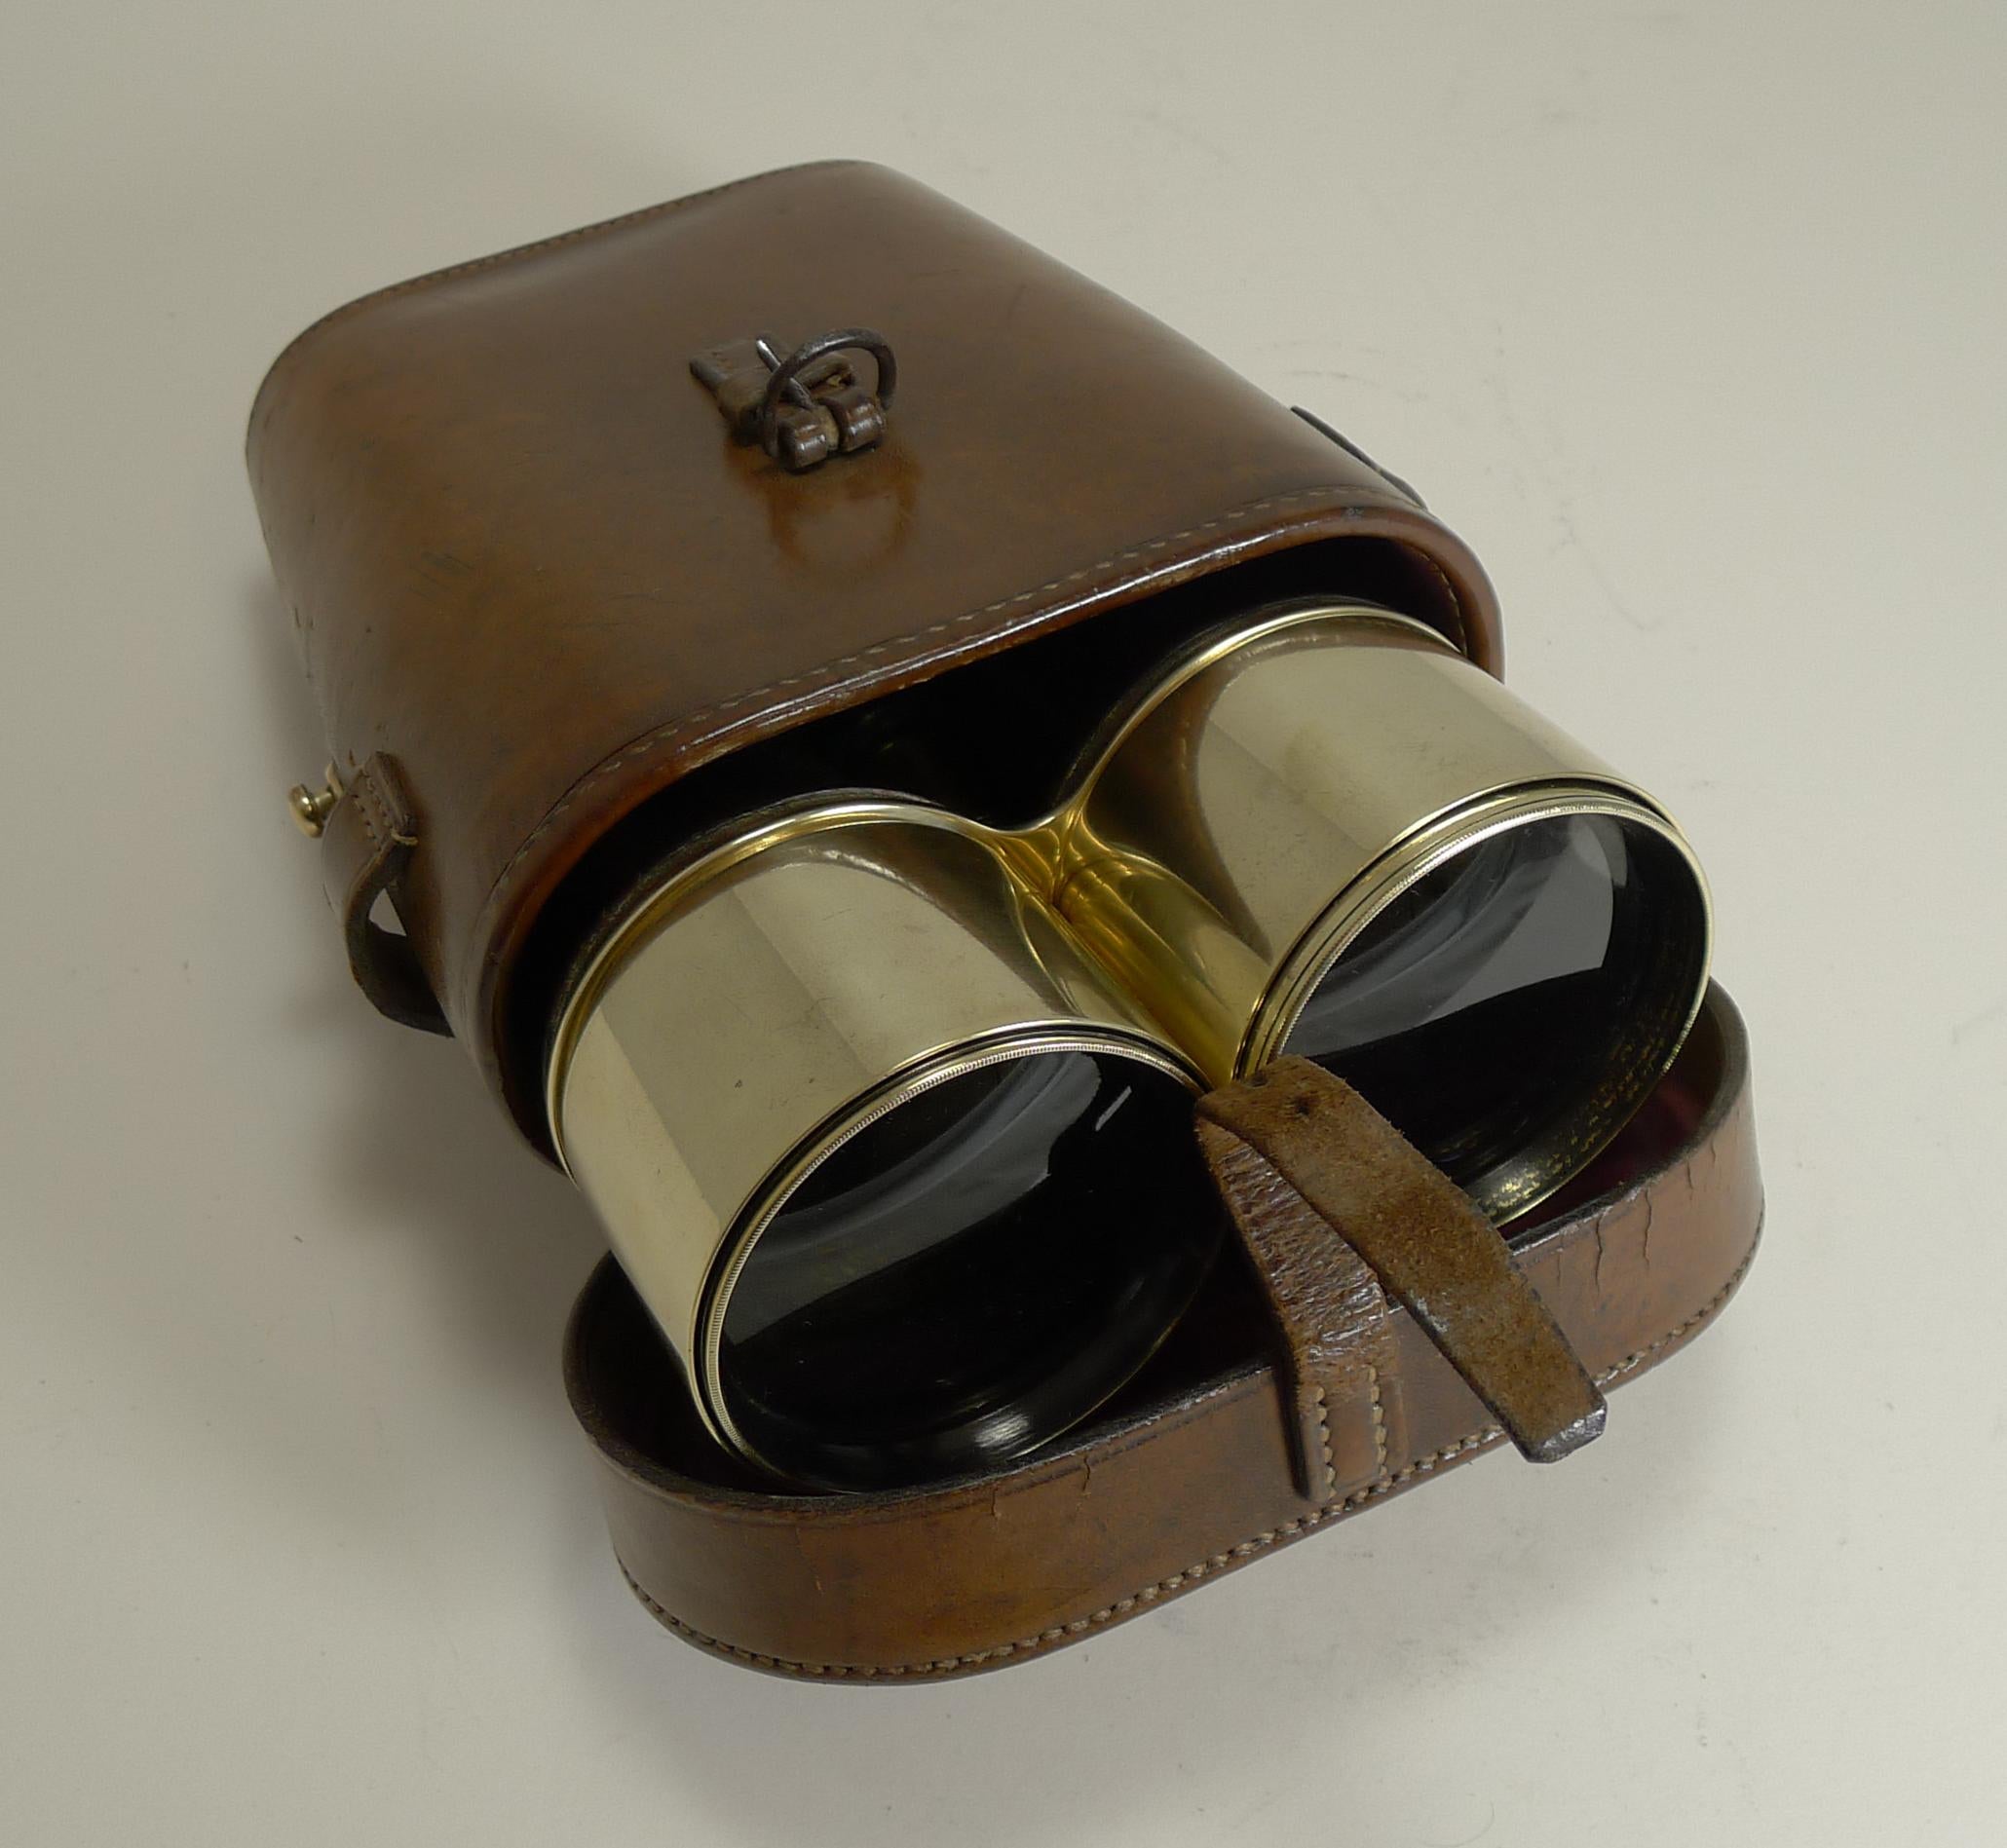 A handsome pair of British issued First World War leather and polished brass binoculars together with the original leather case.

Made by the well renowned maker Ross of London, both eye pieces are signed and the interior of the lid is also signed